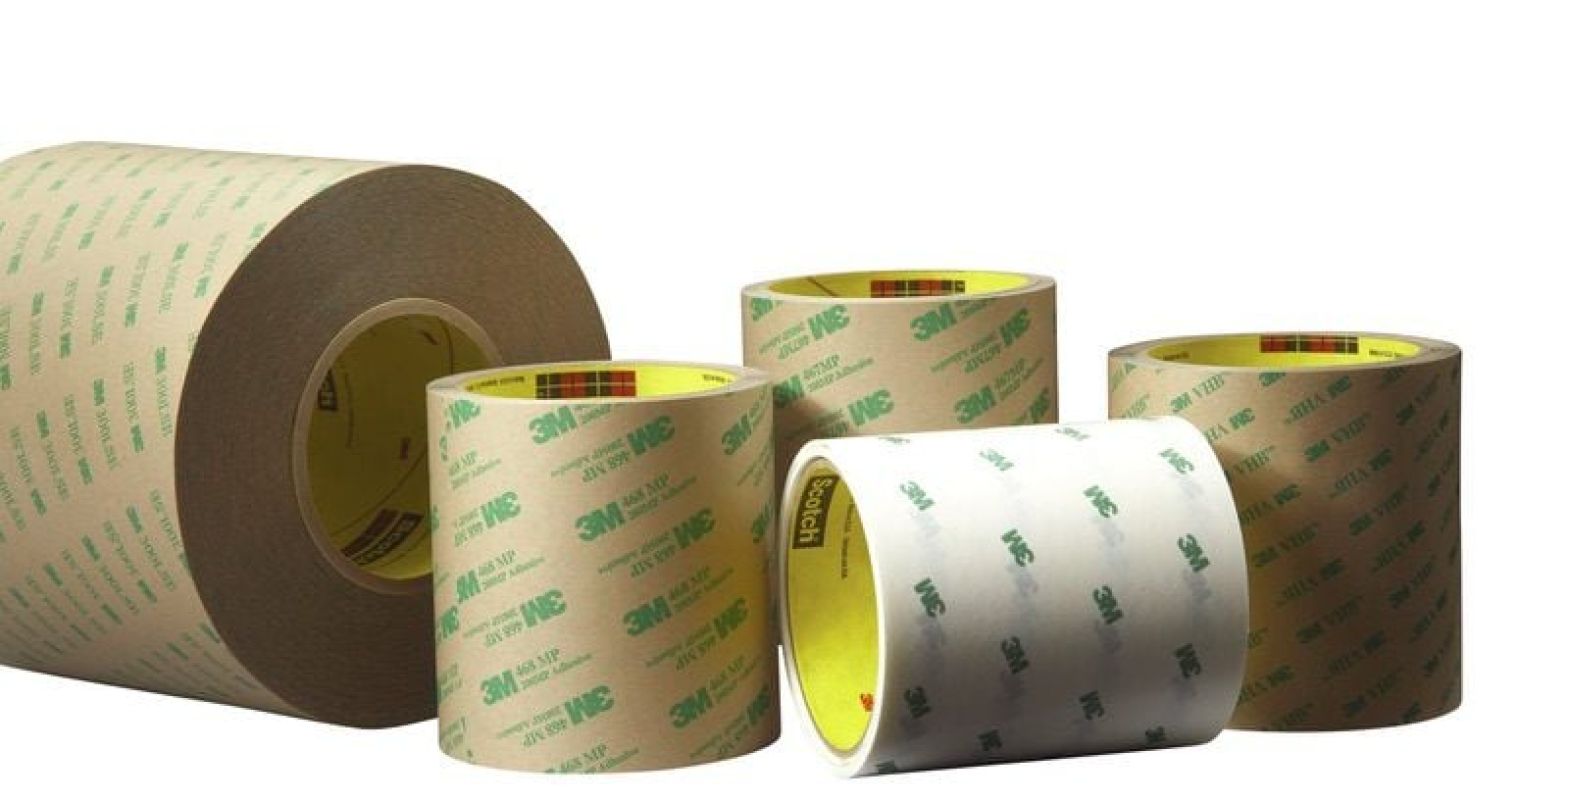 3M™ Adhesive Transfer Tape 9453LE, Clear, 686 mm x 55 m, 0.09 mm